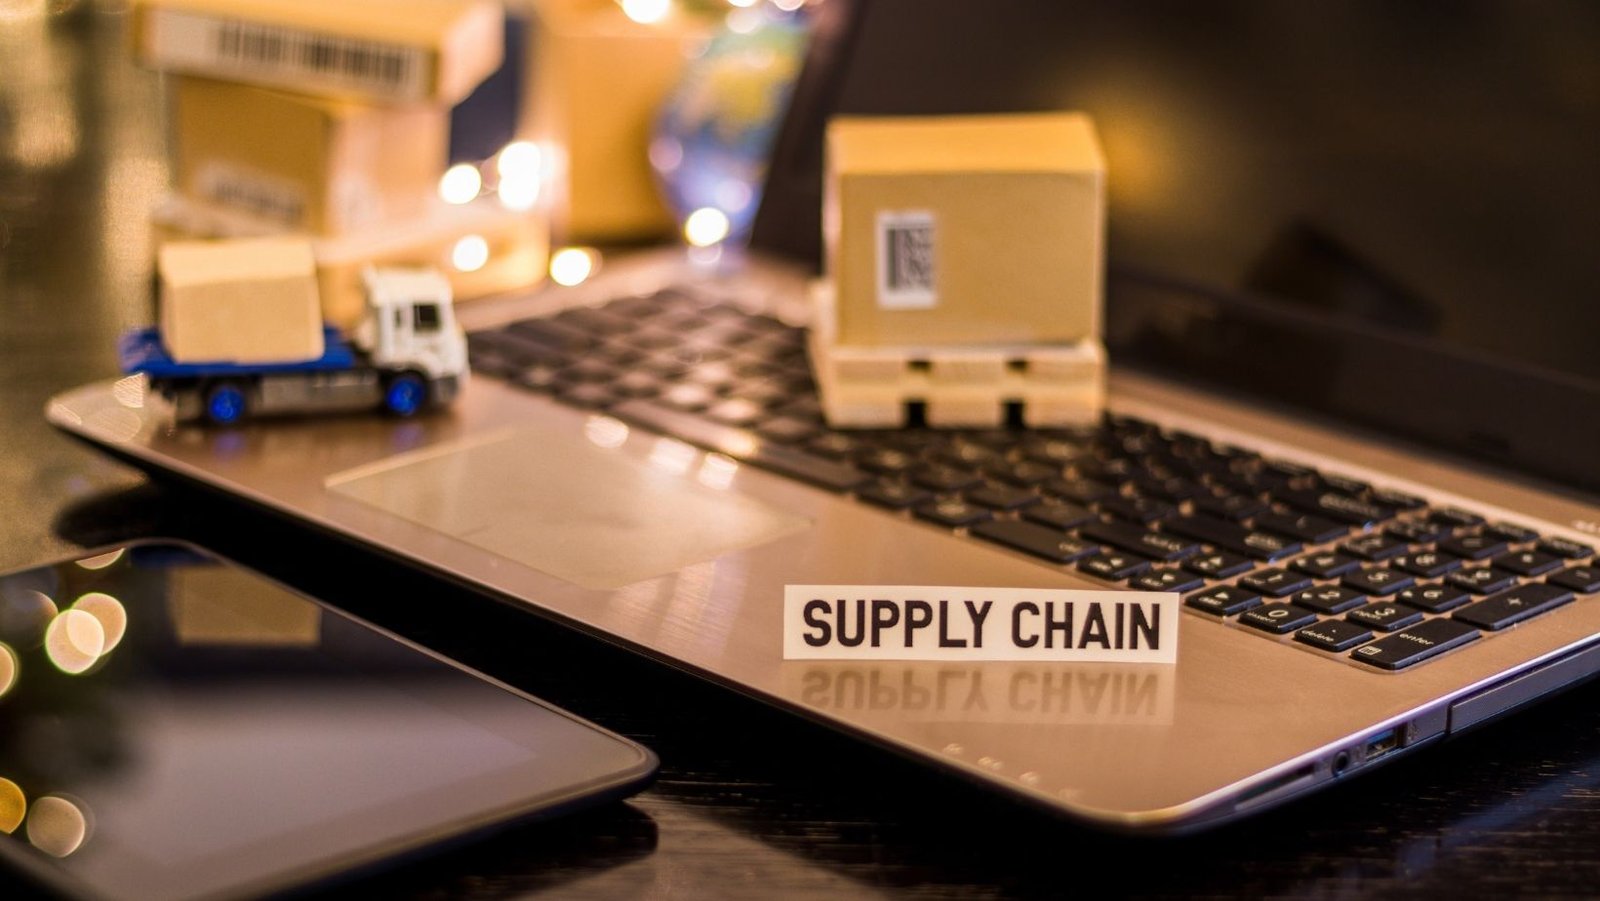 Supply Chain related image